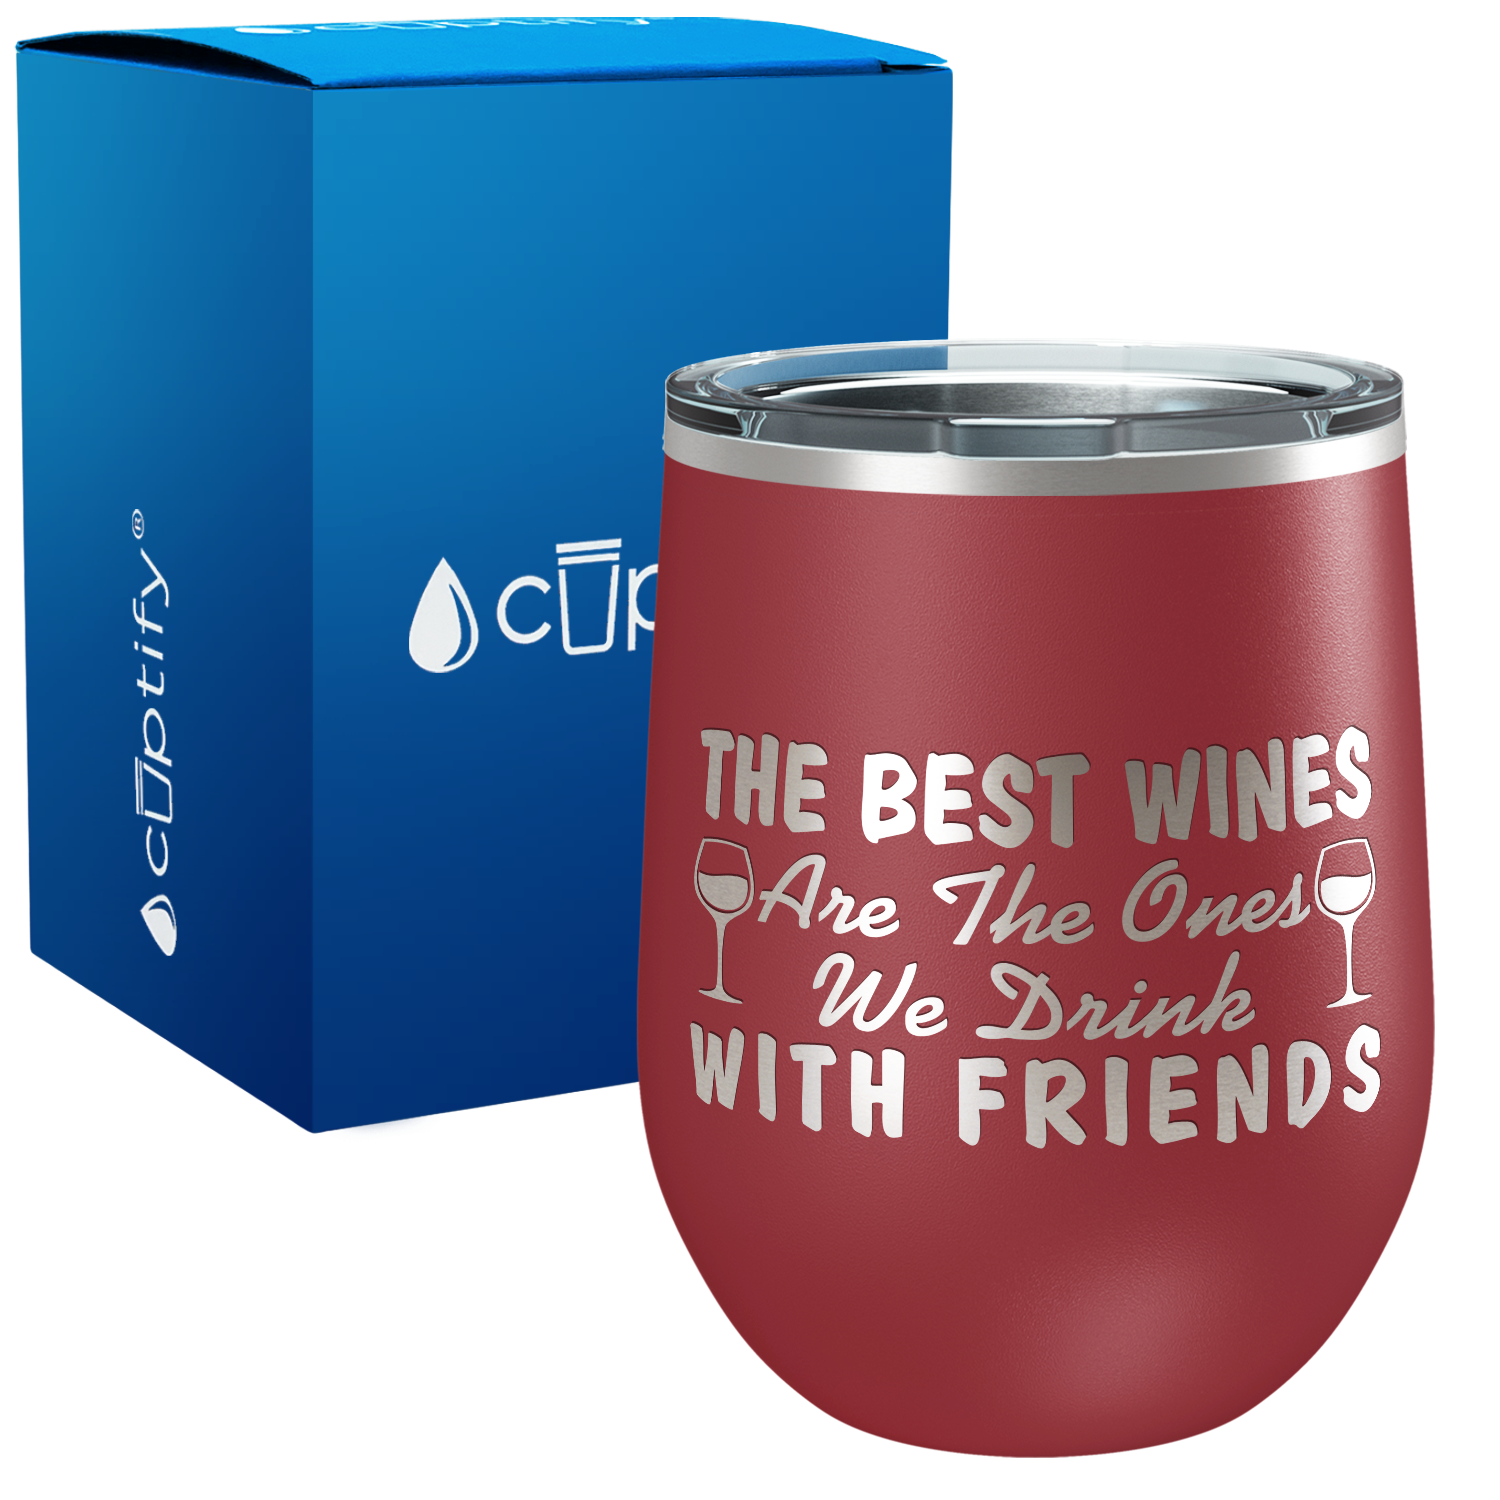 The Best Wines are the Ones 12oz Best Friend Wine Tumbler